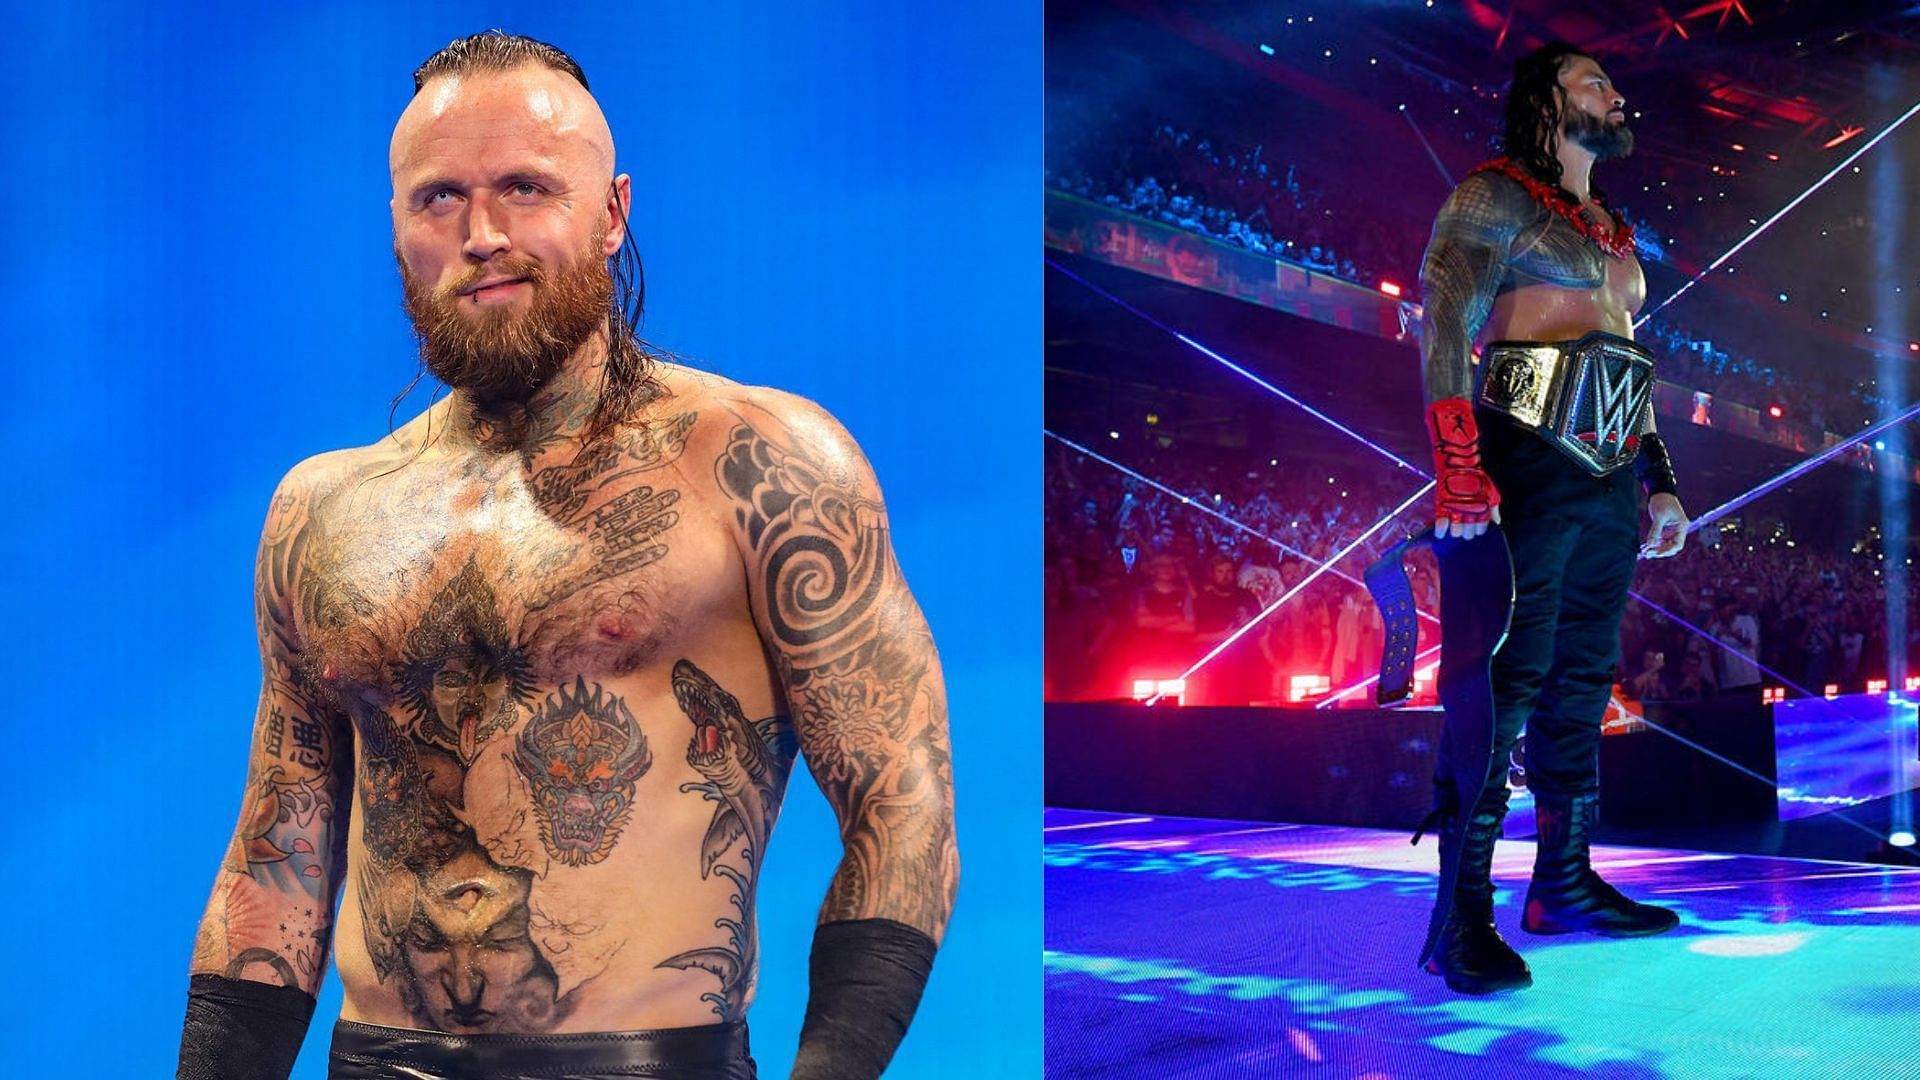 Is Aleister Black the one to dethrone Roman Reigns?